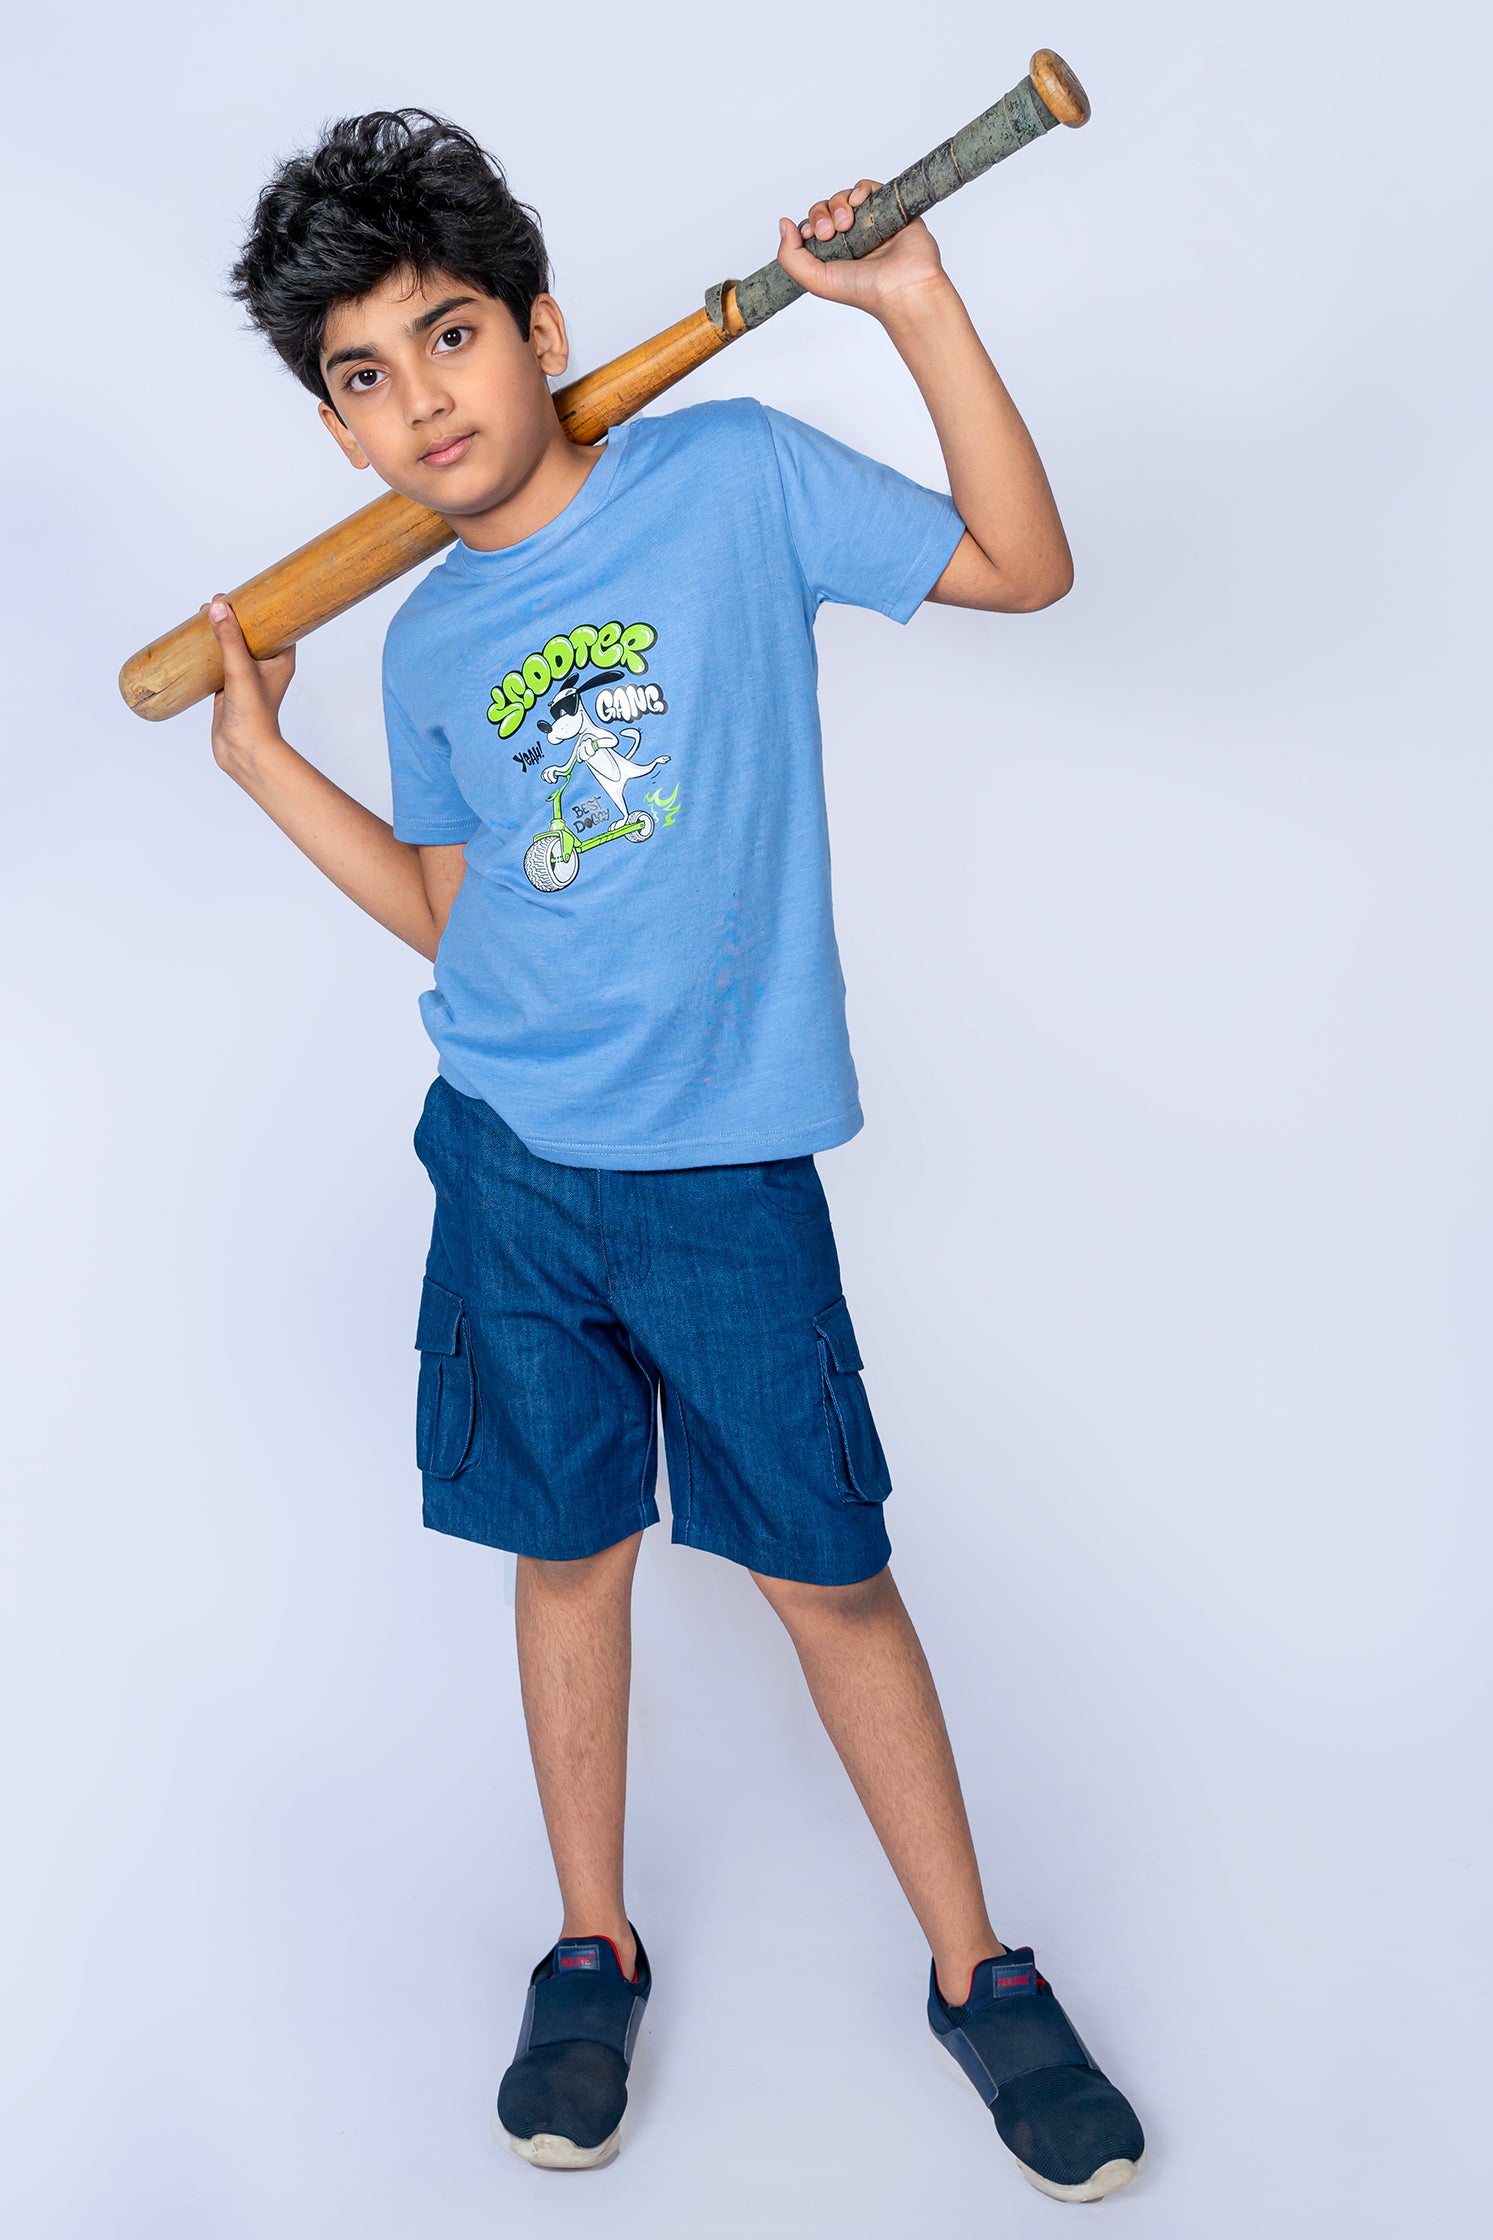 BOYS T-SHIRT NAVY WIHT FRONT "SCOOTER" PRINTING